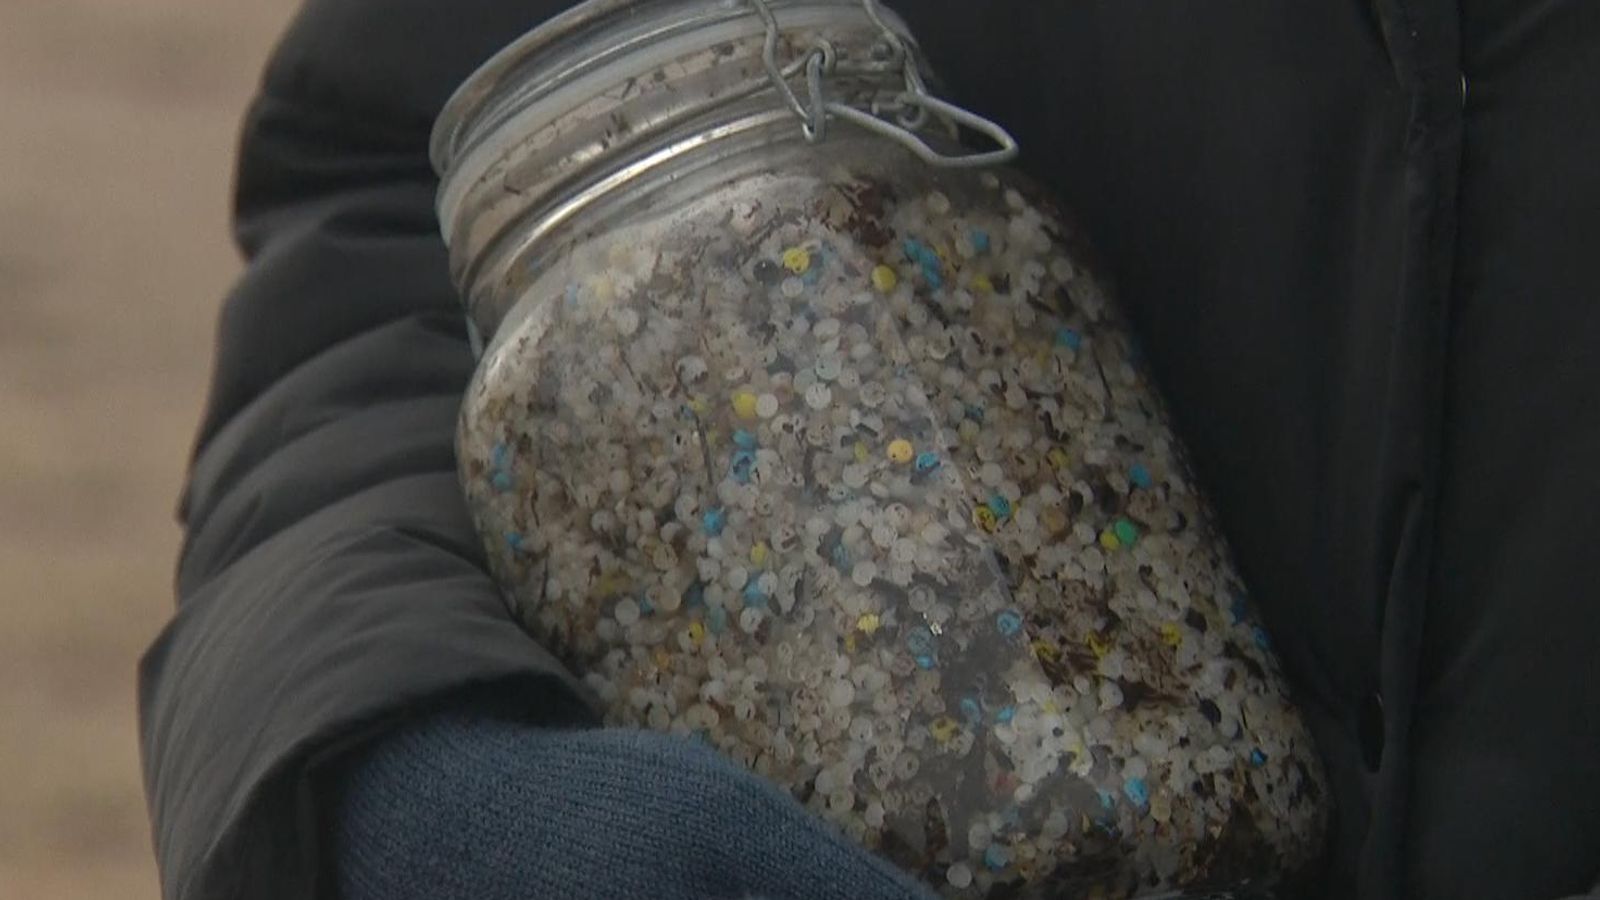 Record number of plastic nurdles found on beaches as environmental groups call for tougher laws